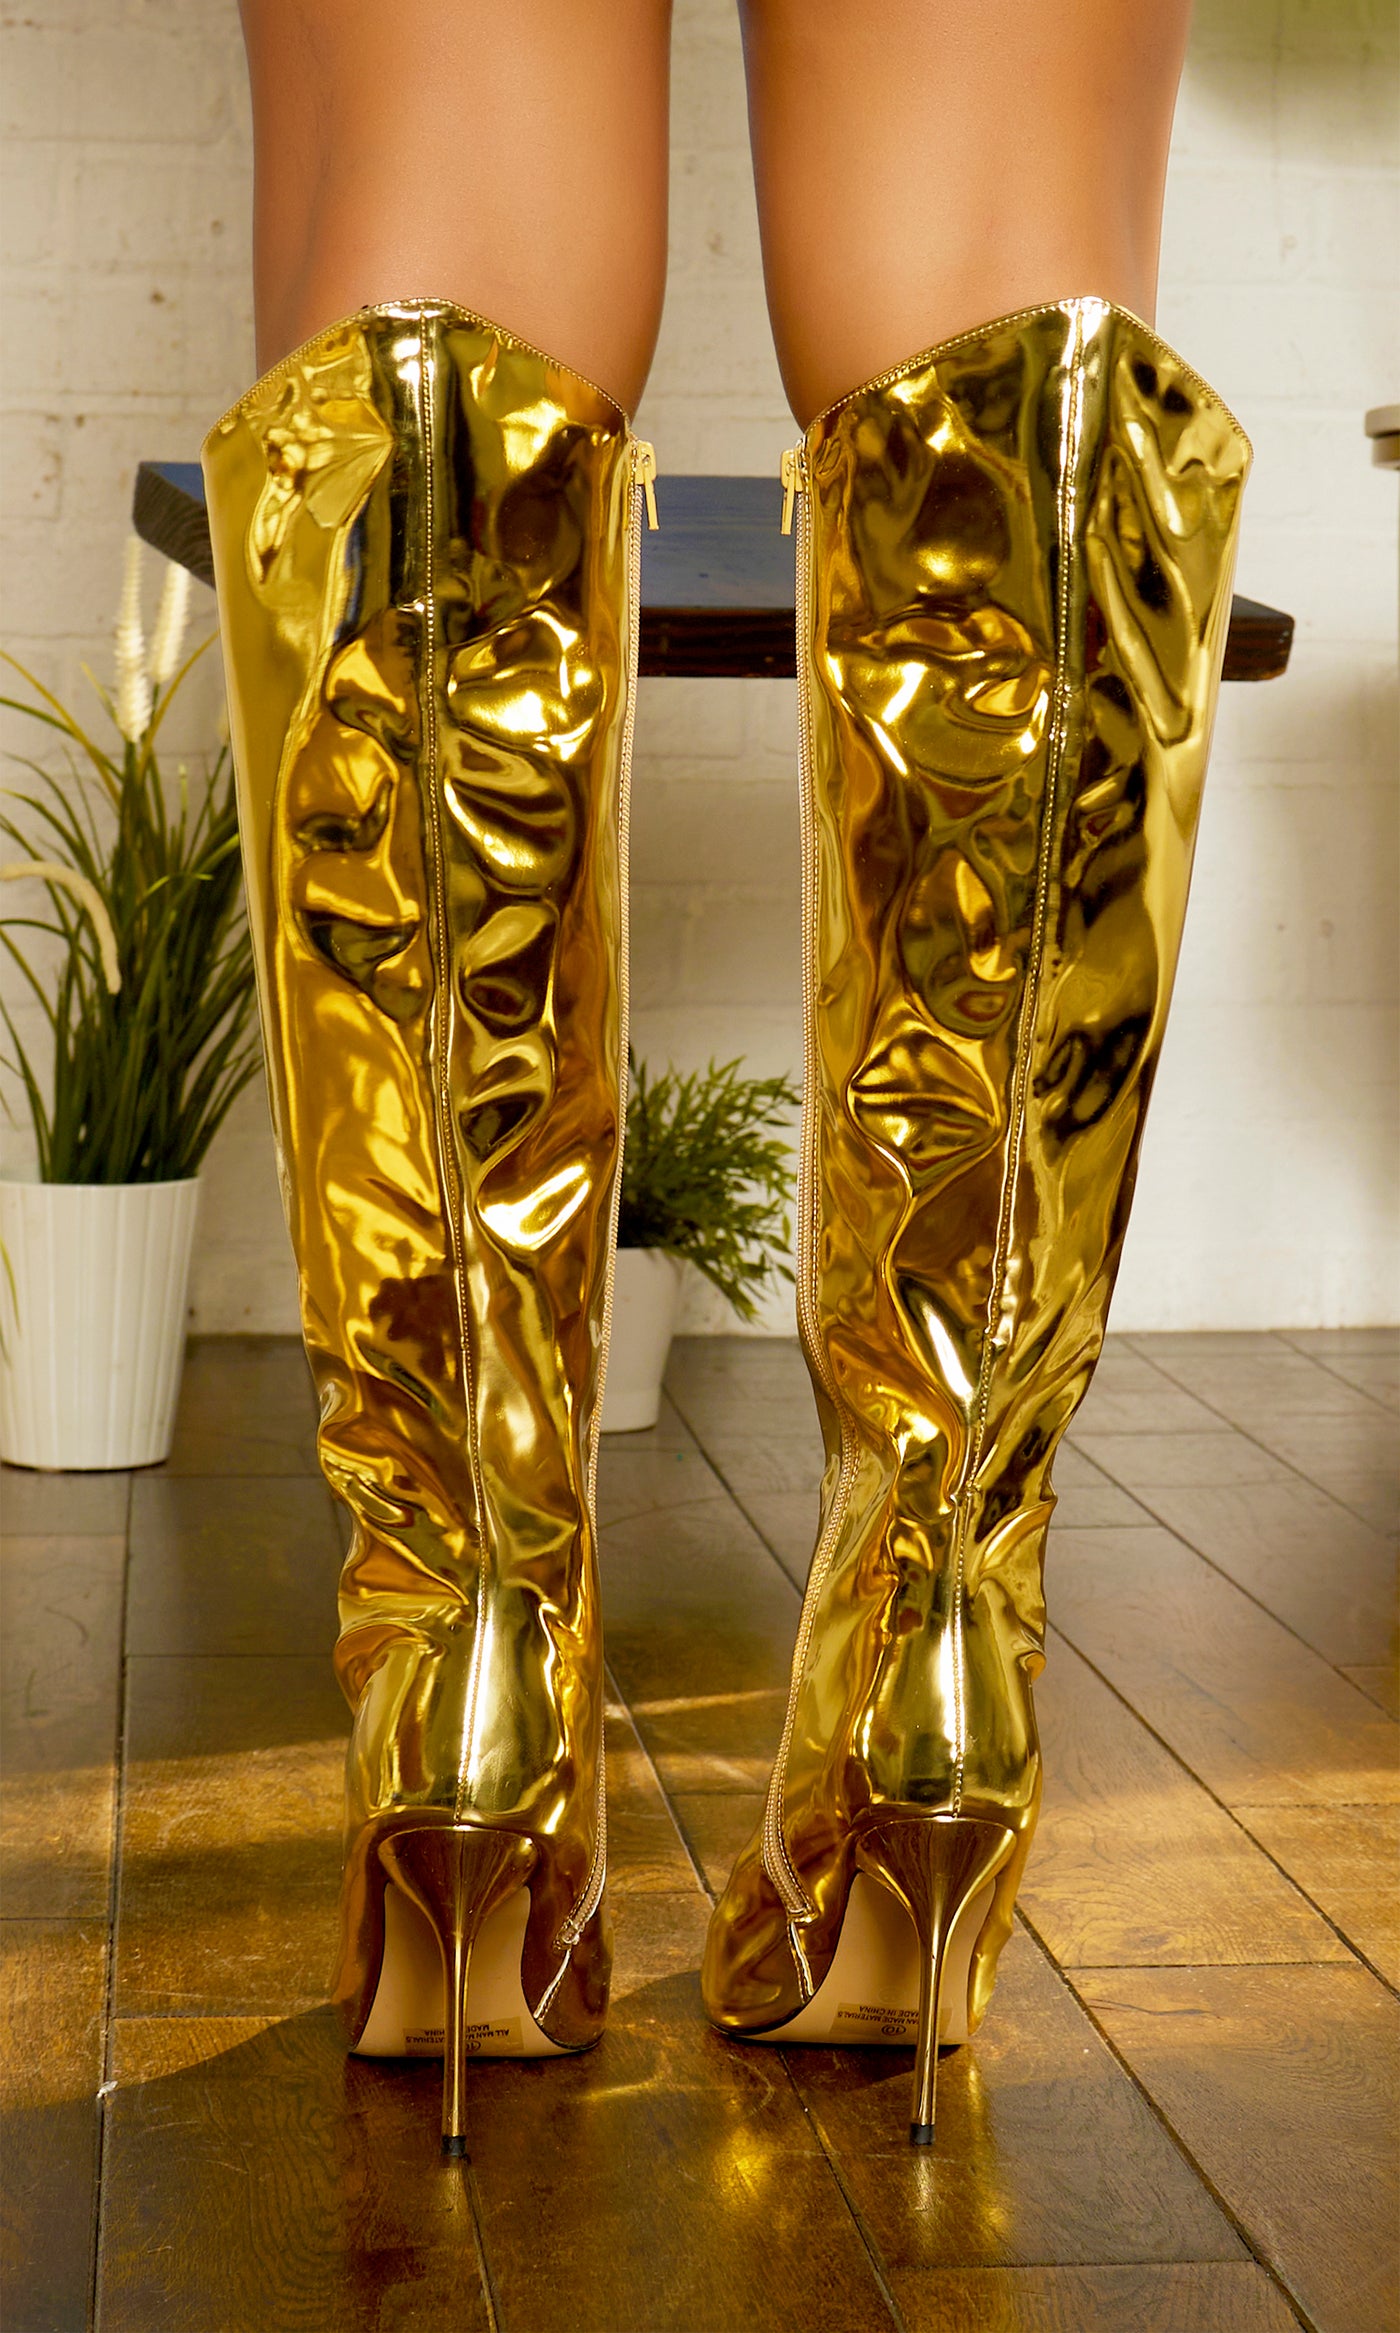 Golden Life Boots - Cutely Covered